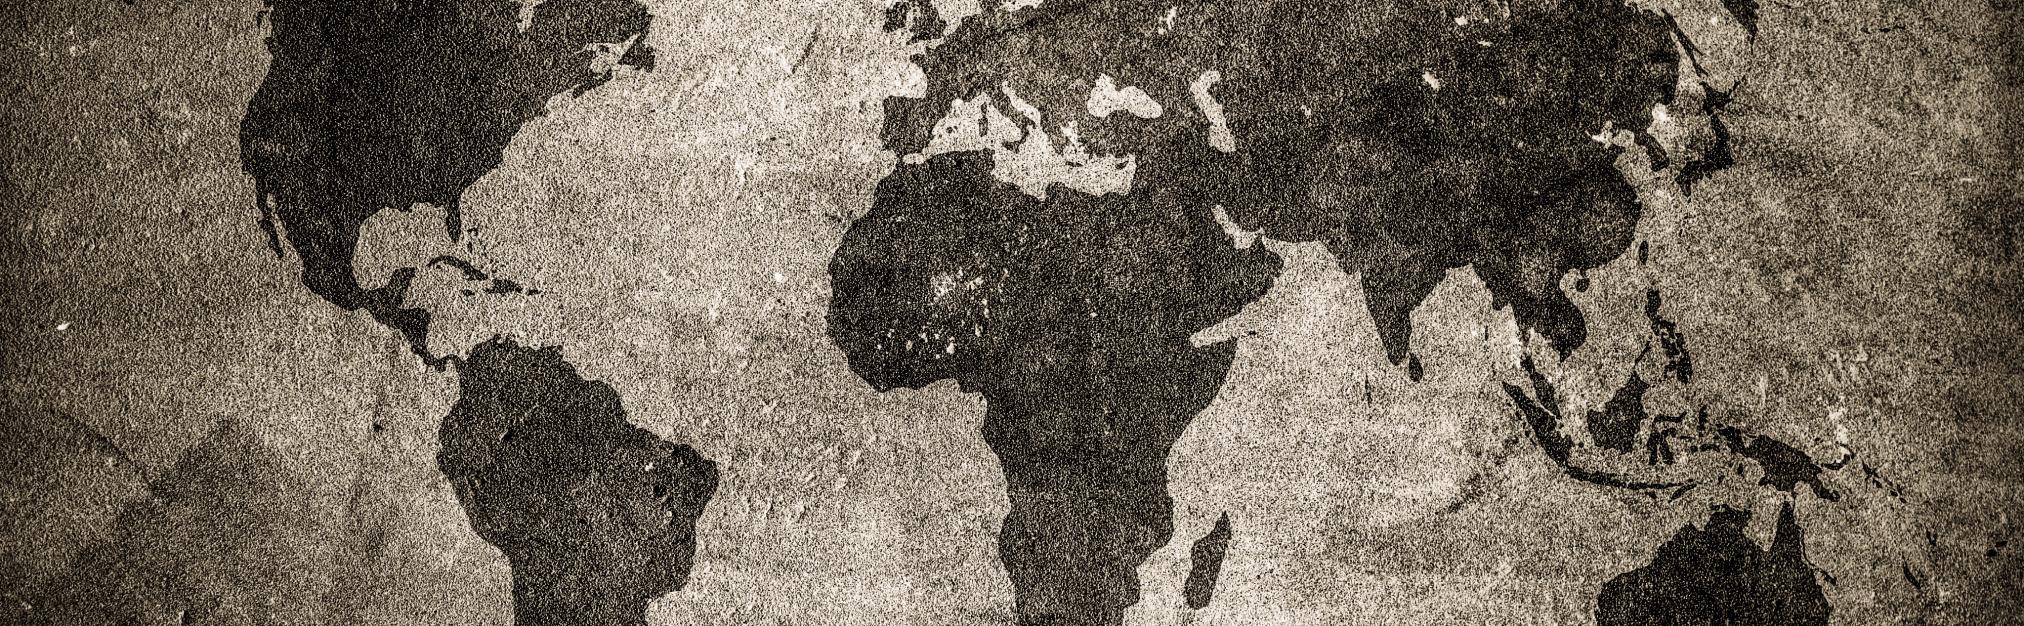 Earth: black and white outlines of the continents.